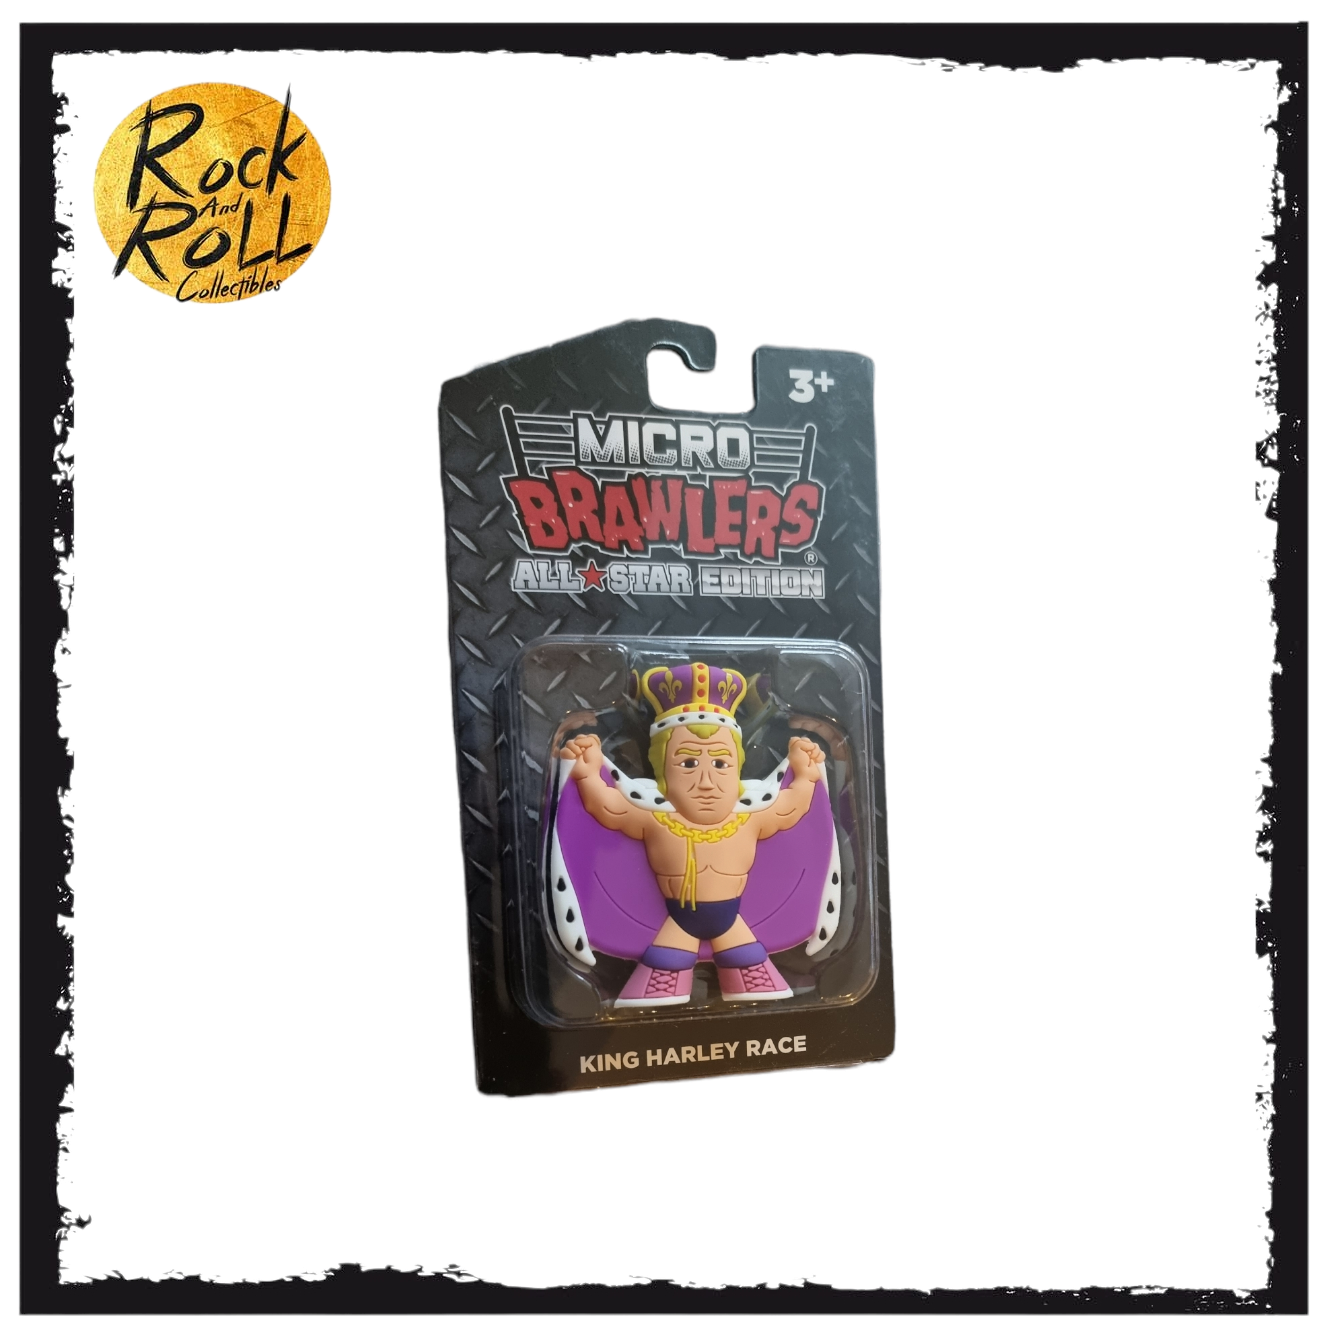 King Harley Race Micro Brawler – rock and roll collectibles